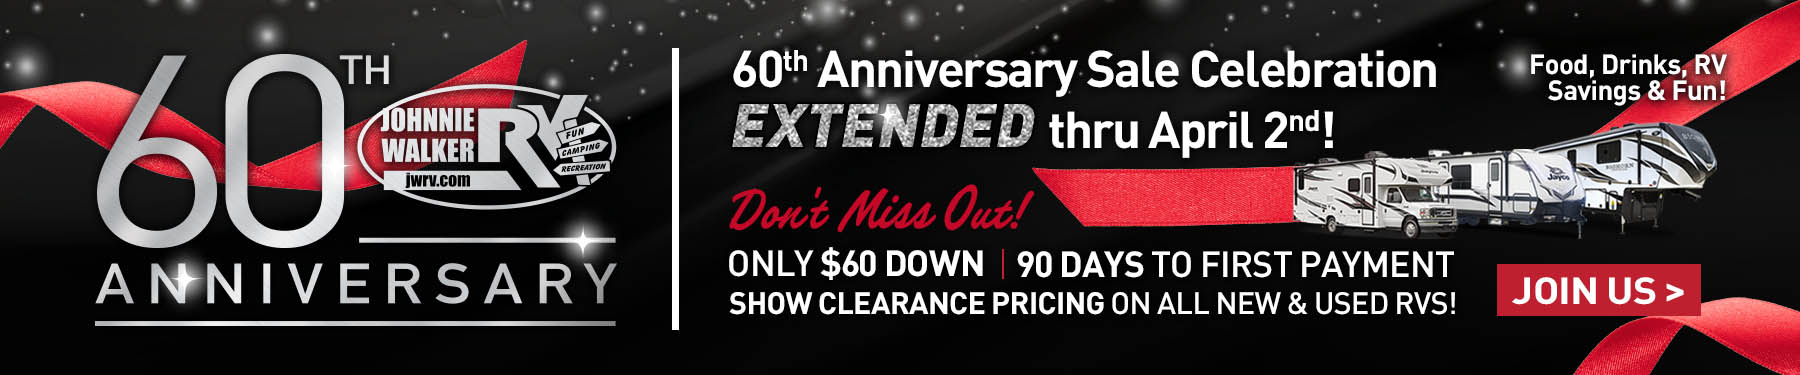 60th Anniversary Sale EXTENDED